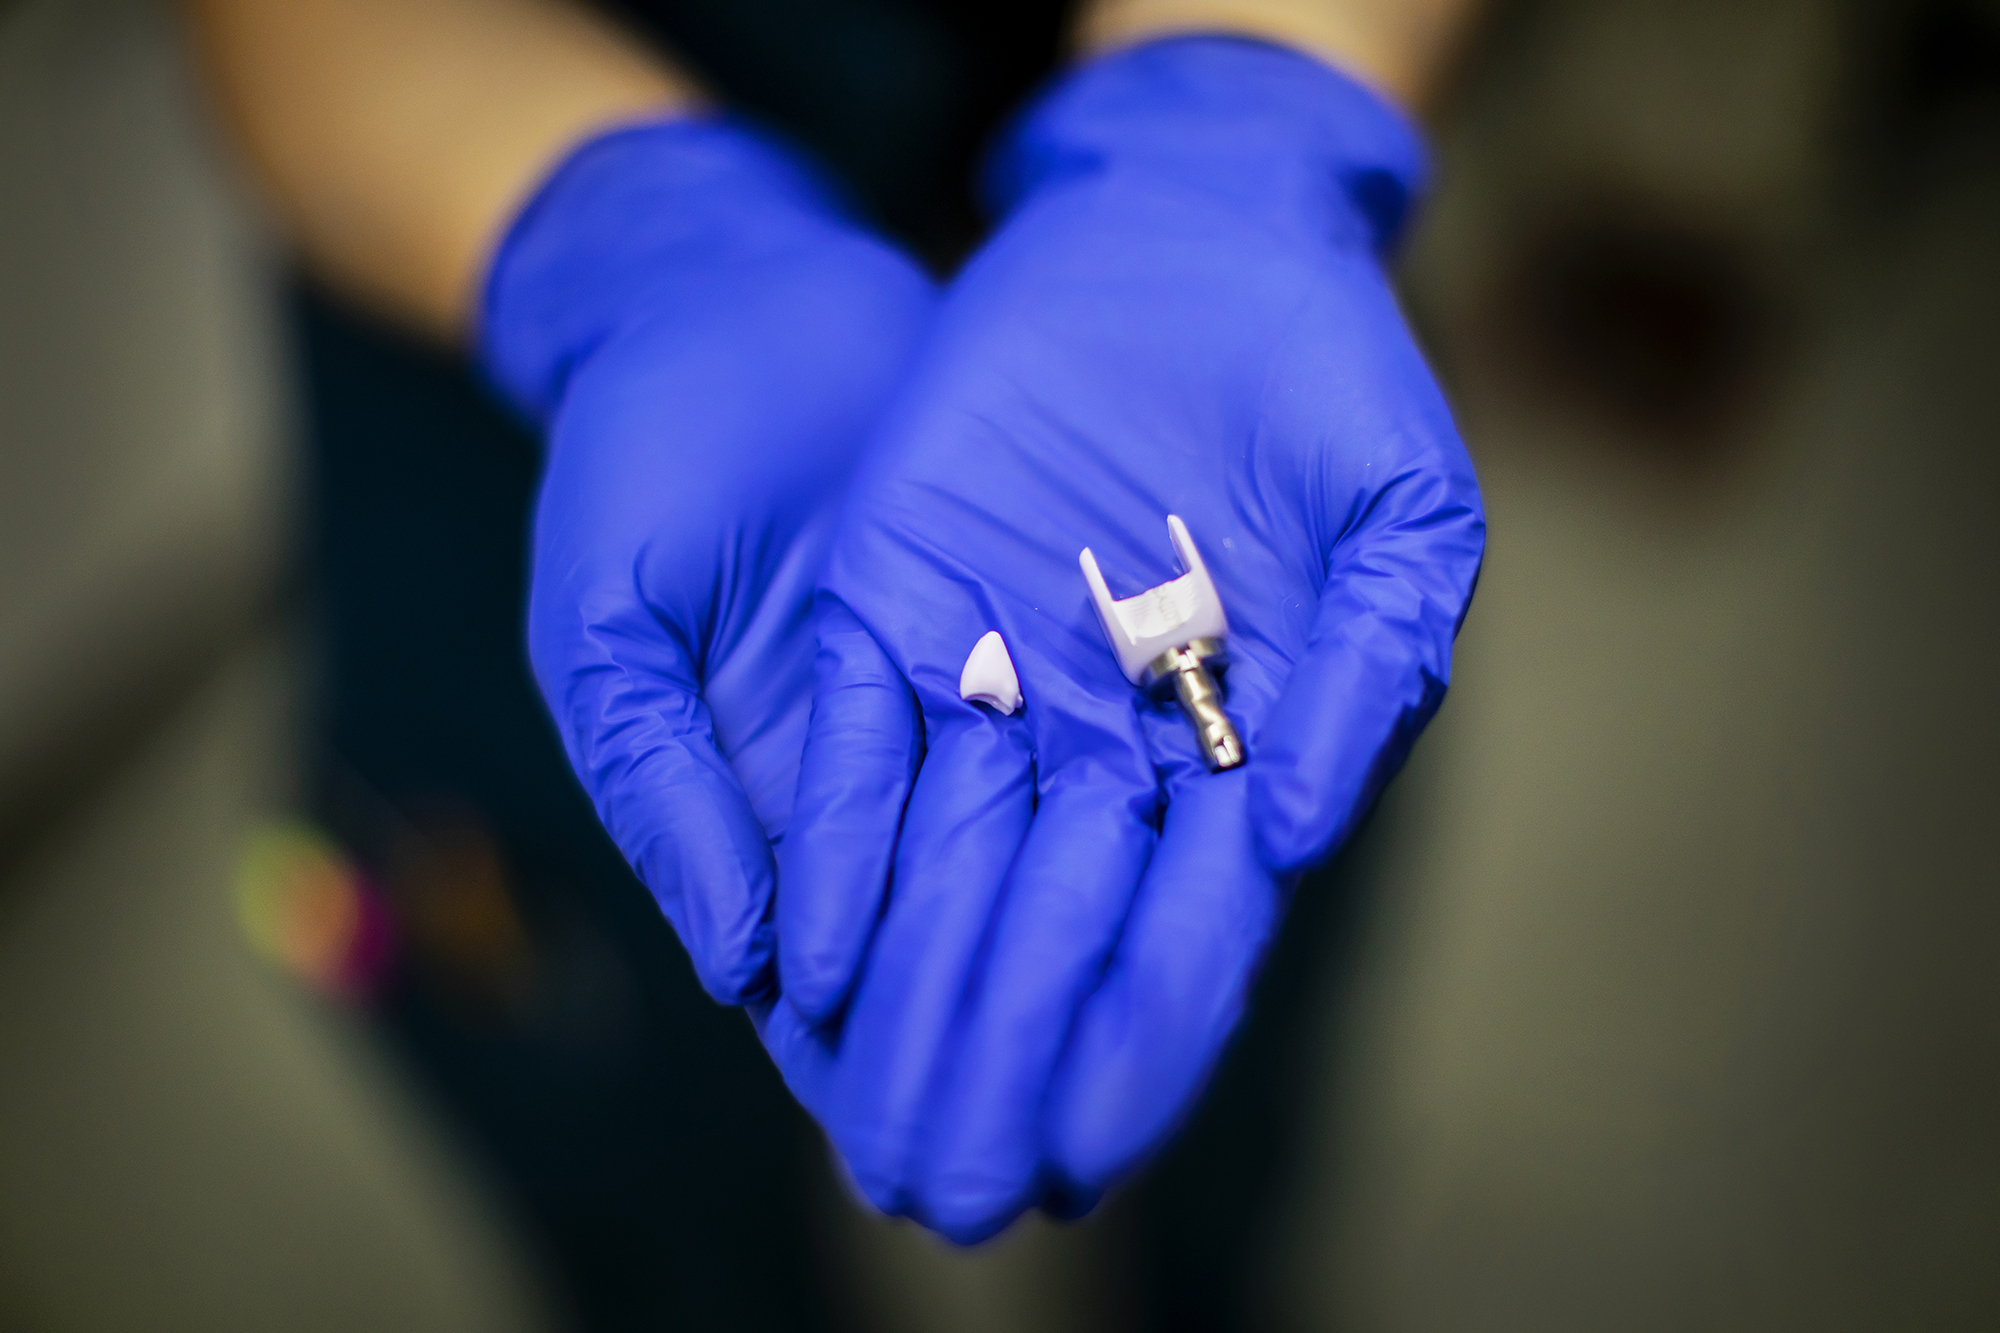 A pair of gloved hands holding a high-tech ceramic tooth model.